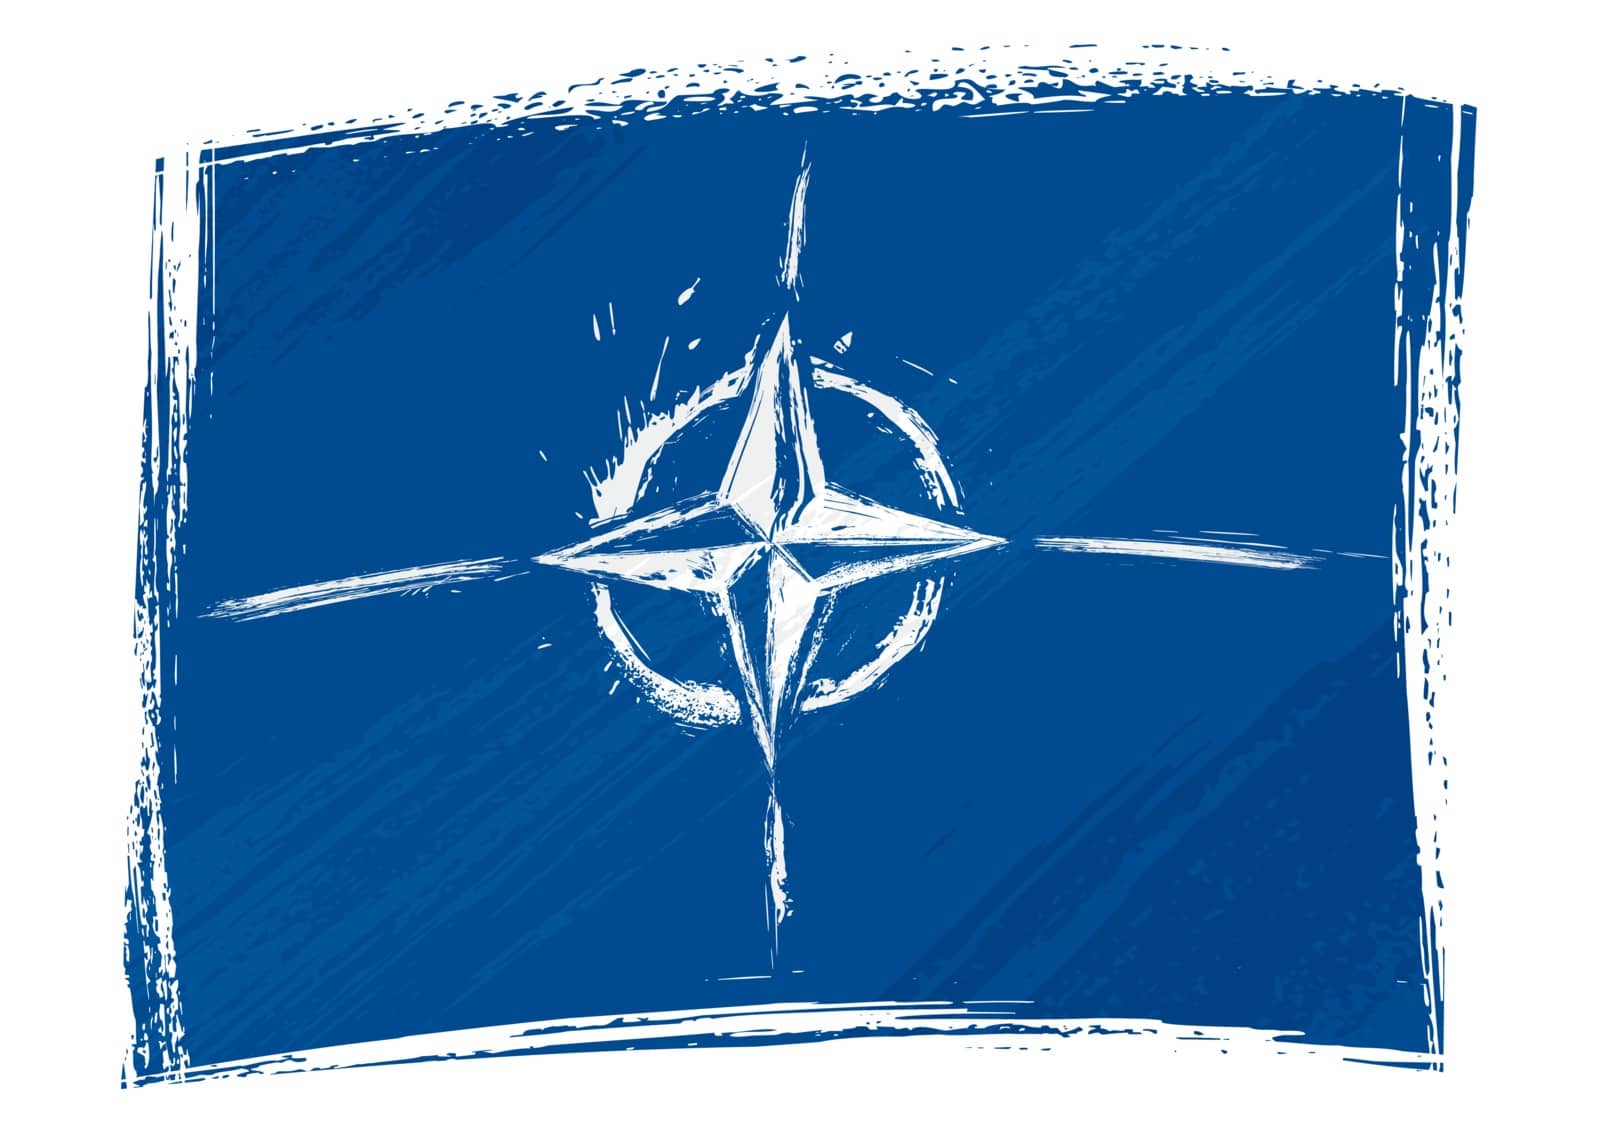 NATO flag created in grunge style